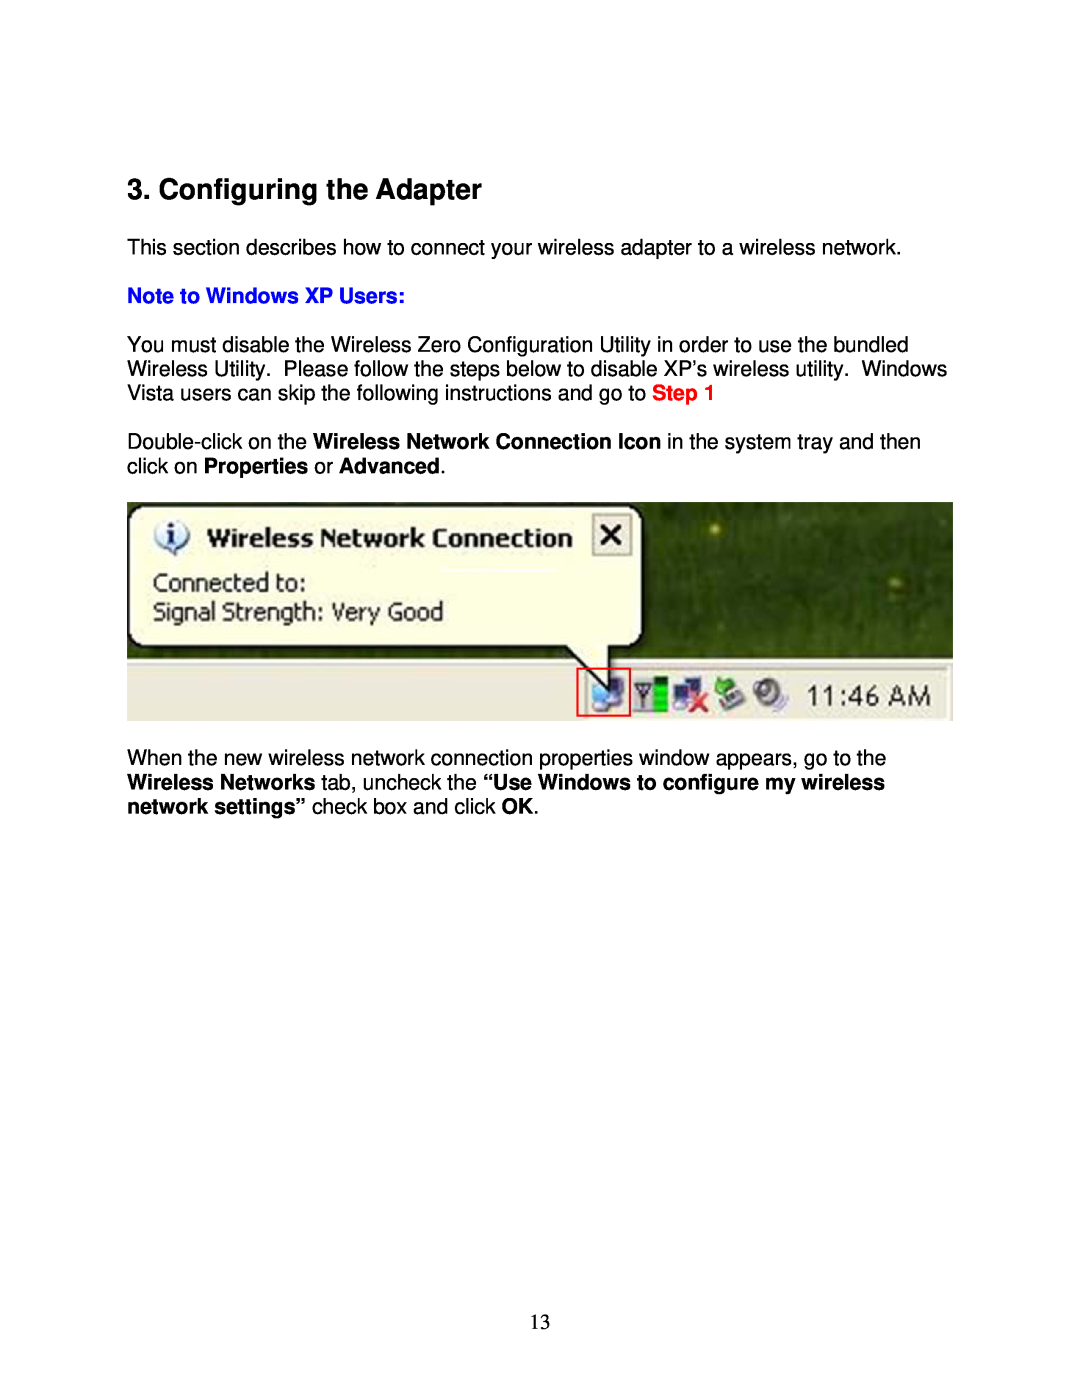 Airlink101 AWLL6070 user manual Configuring the Adapter, Note to Windows XP Users 